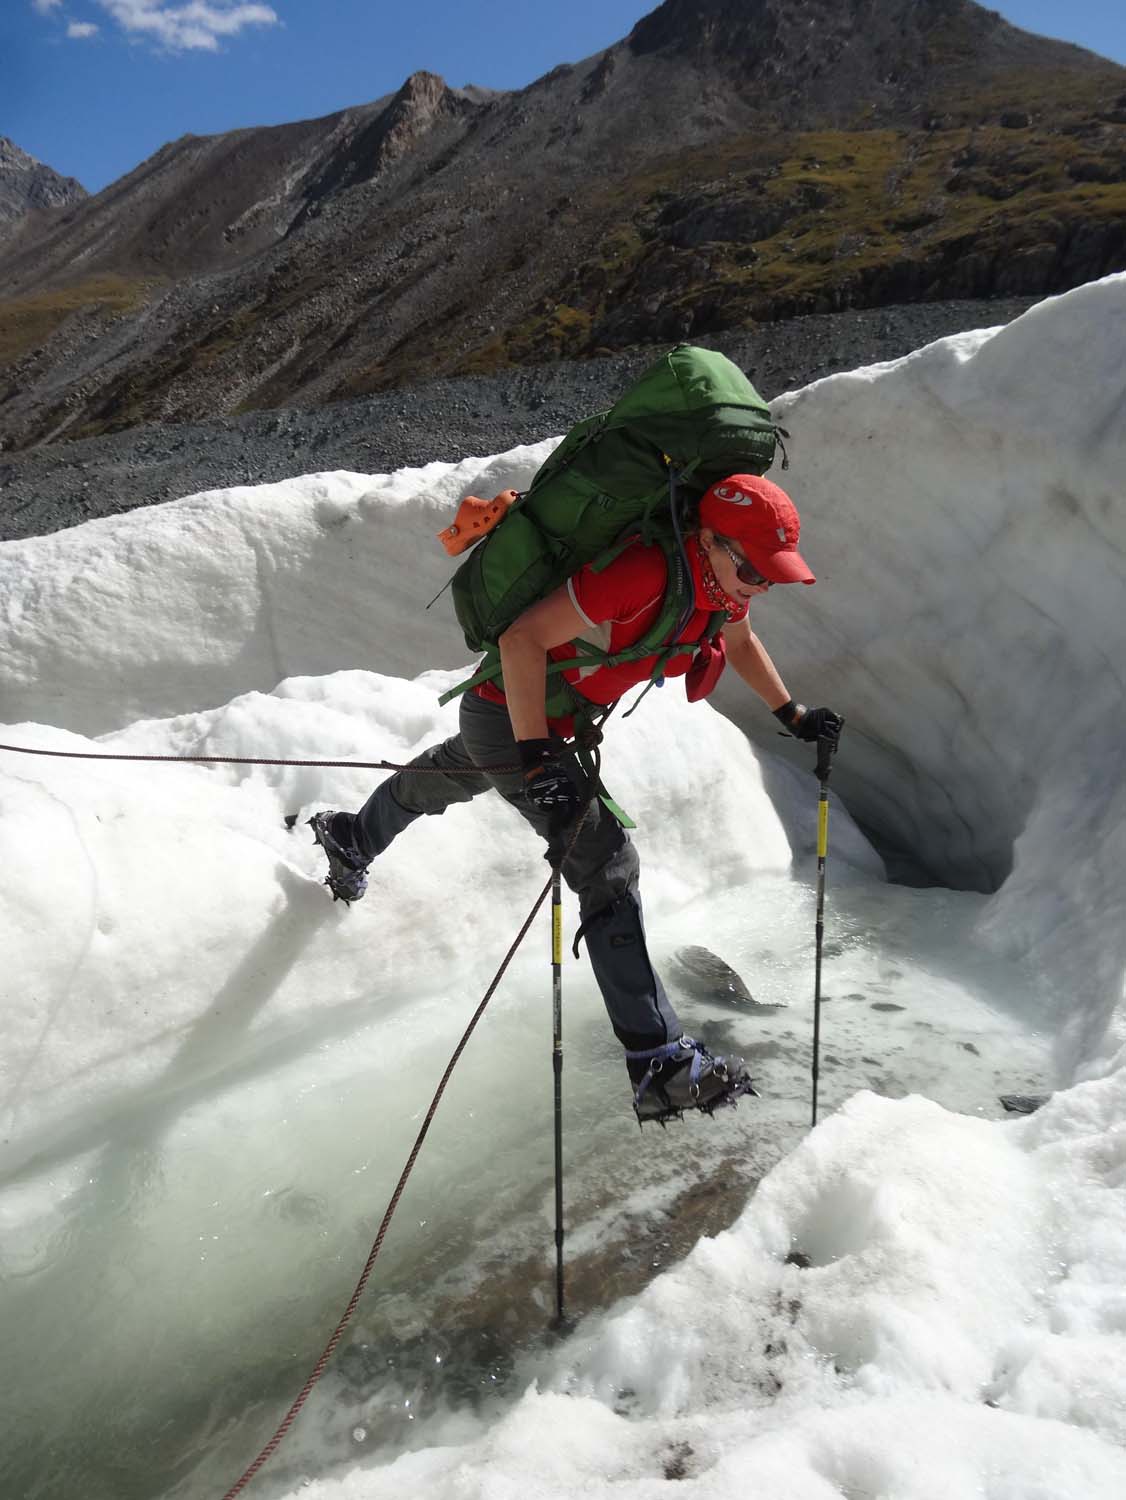 crampons and big backpack make it difficult to cross small streams